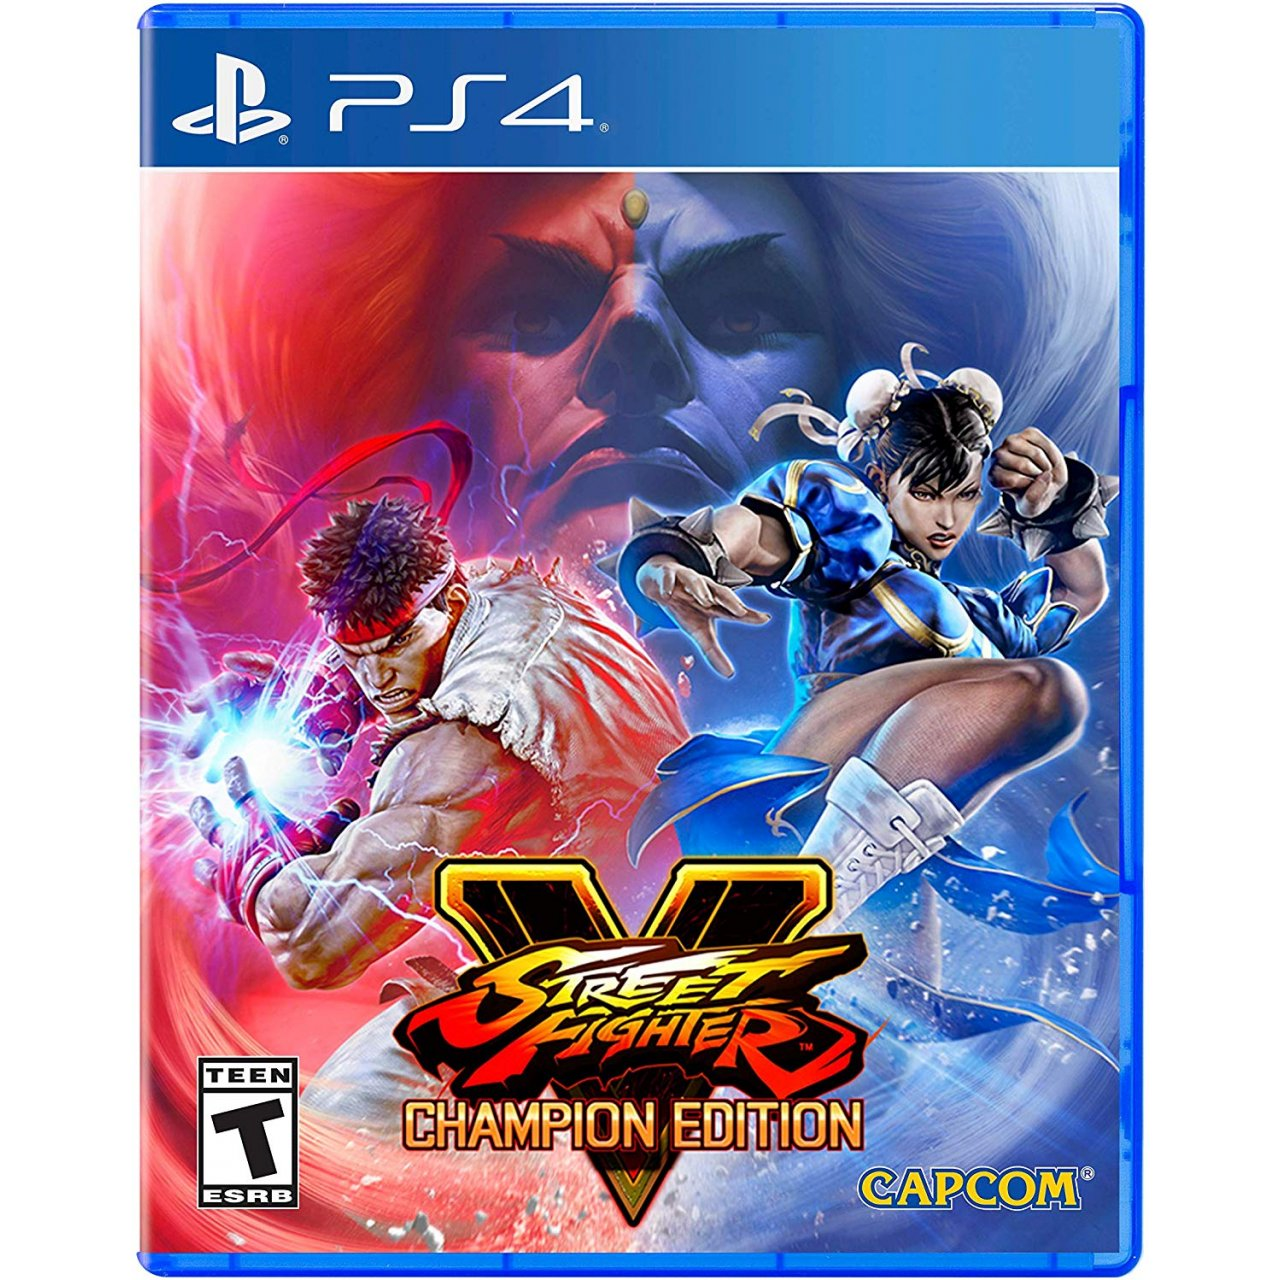 street fighter 5 champion edition characters